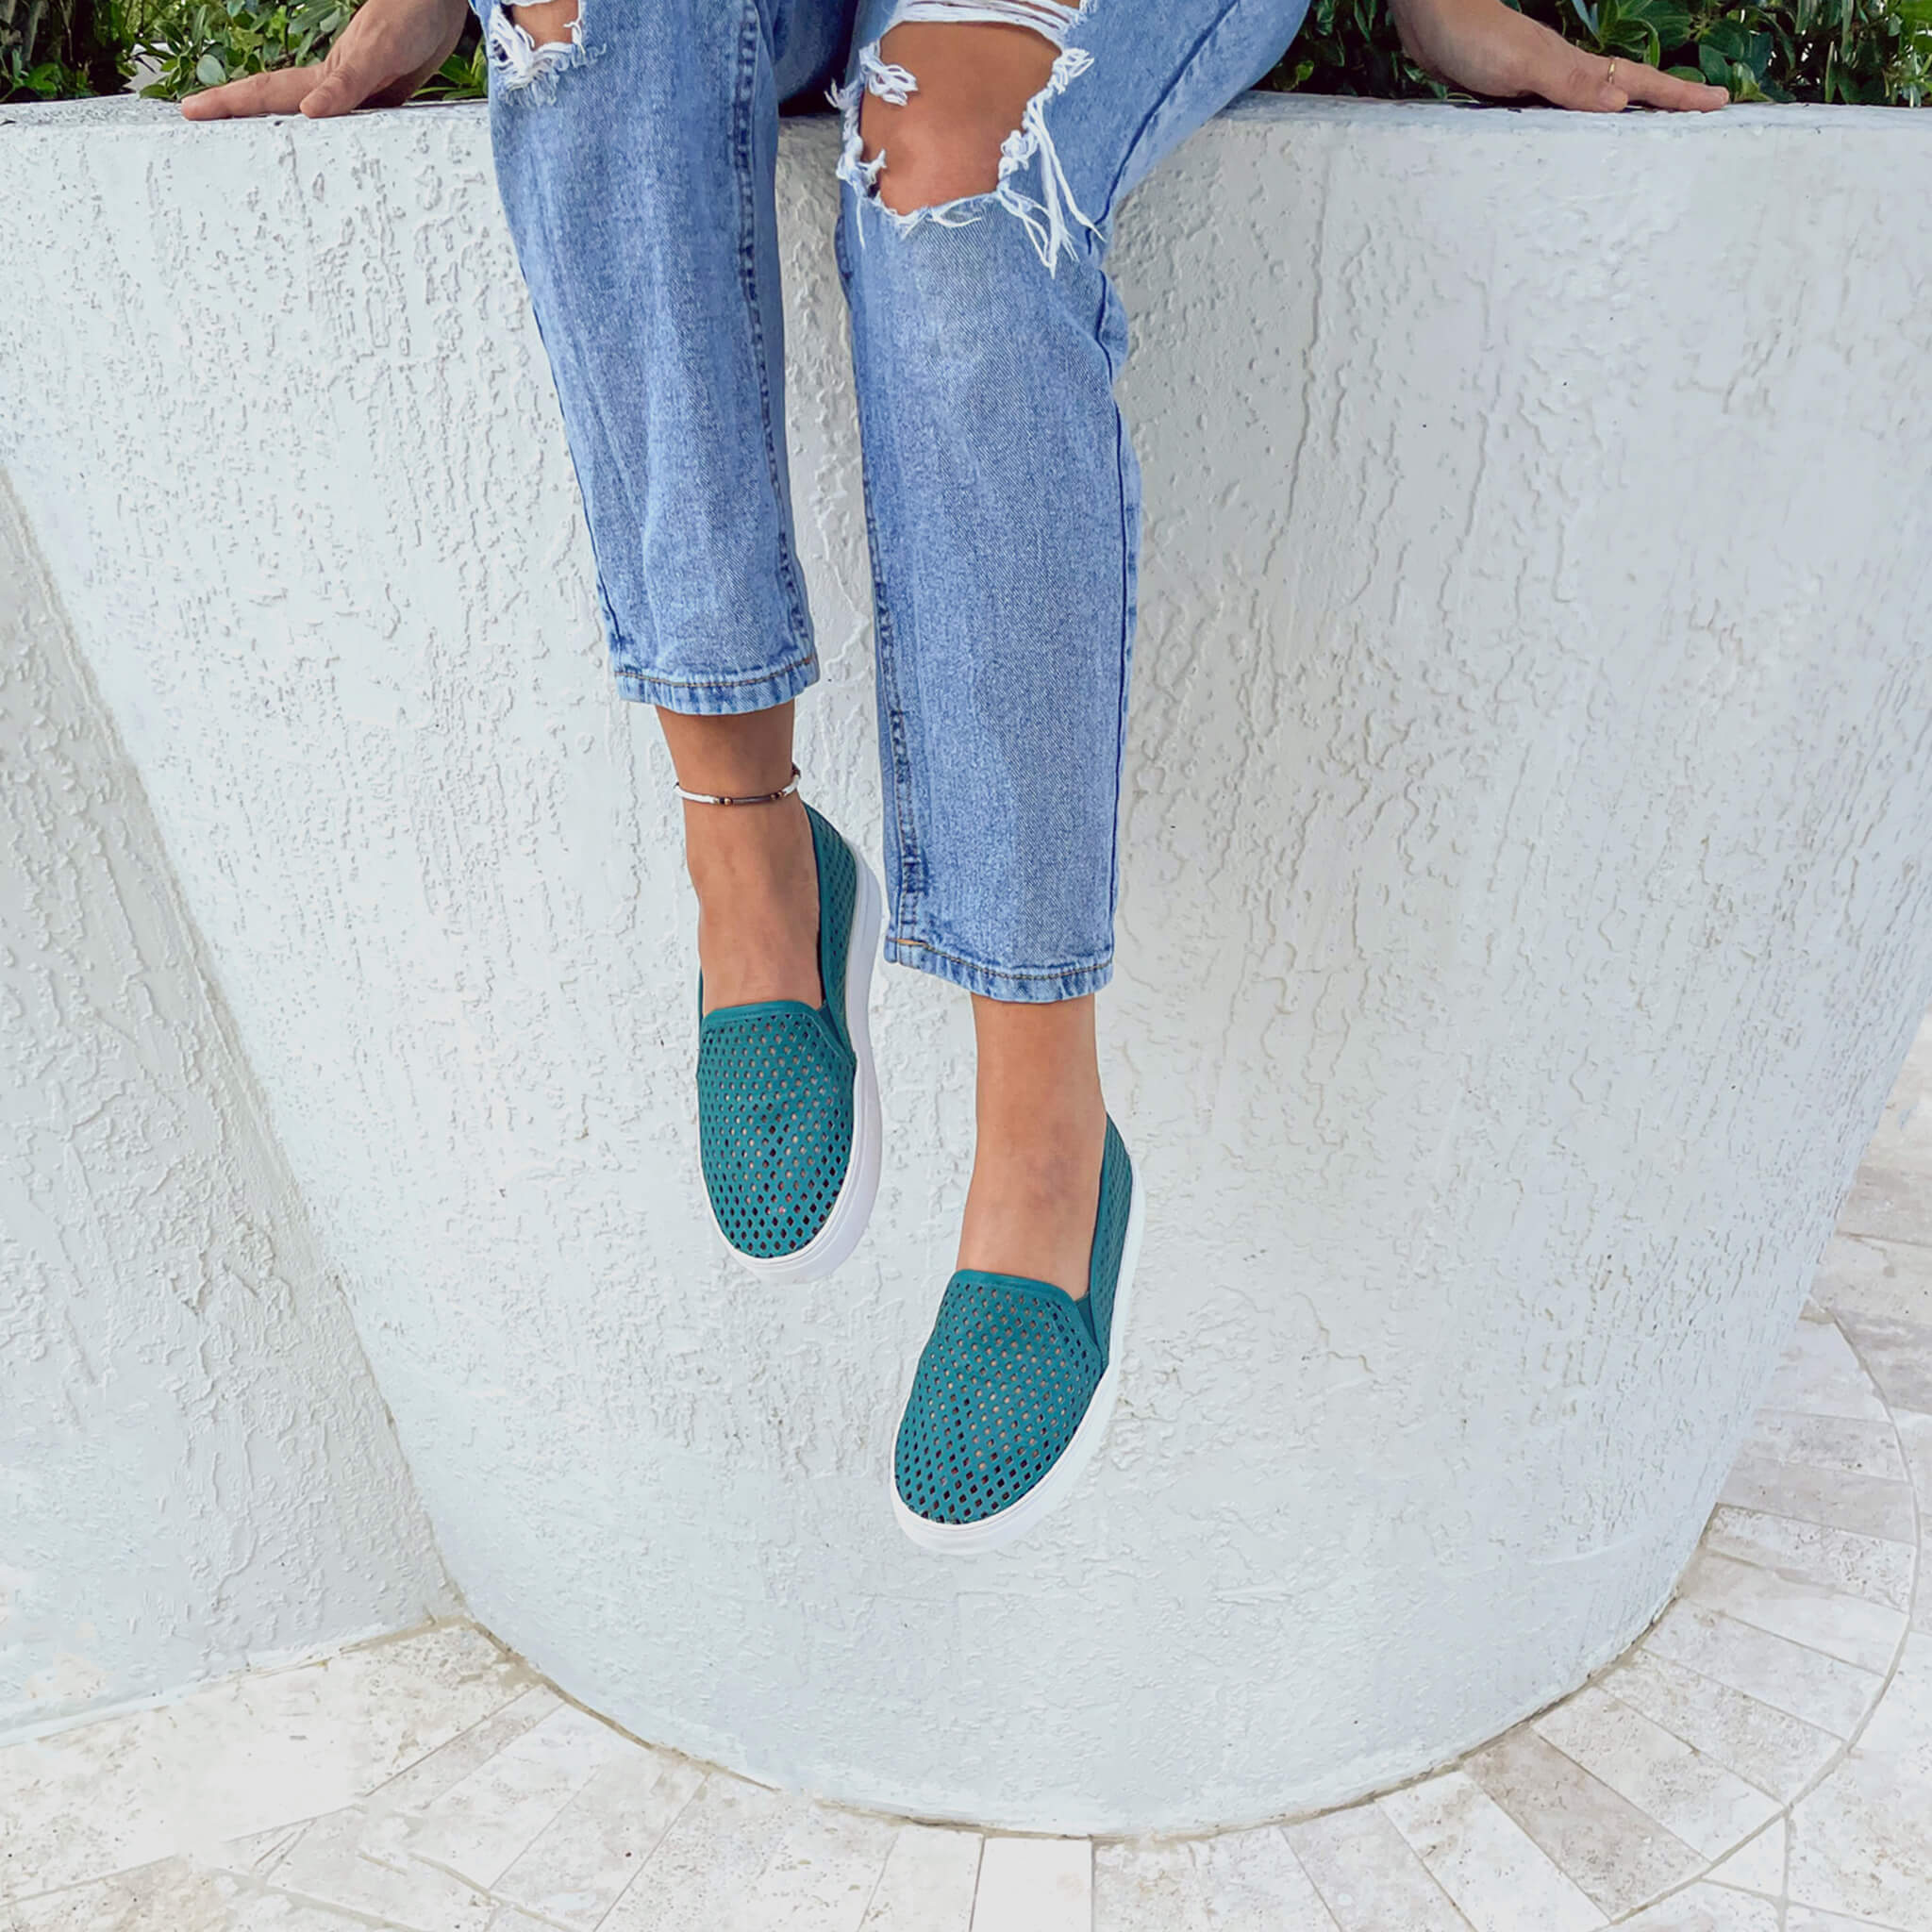 Jibs Classics Teal leather slip-on sneaker shoes sustainable Editorial